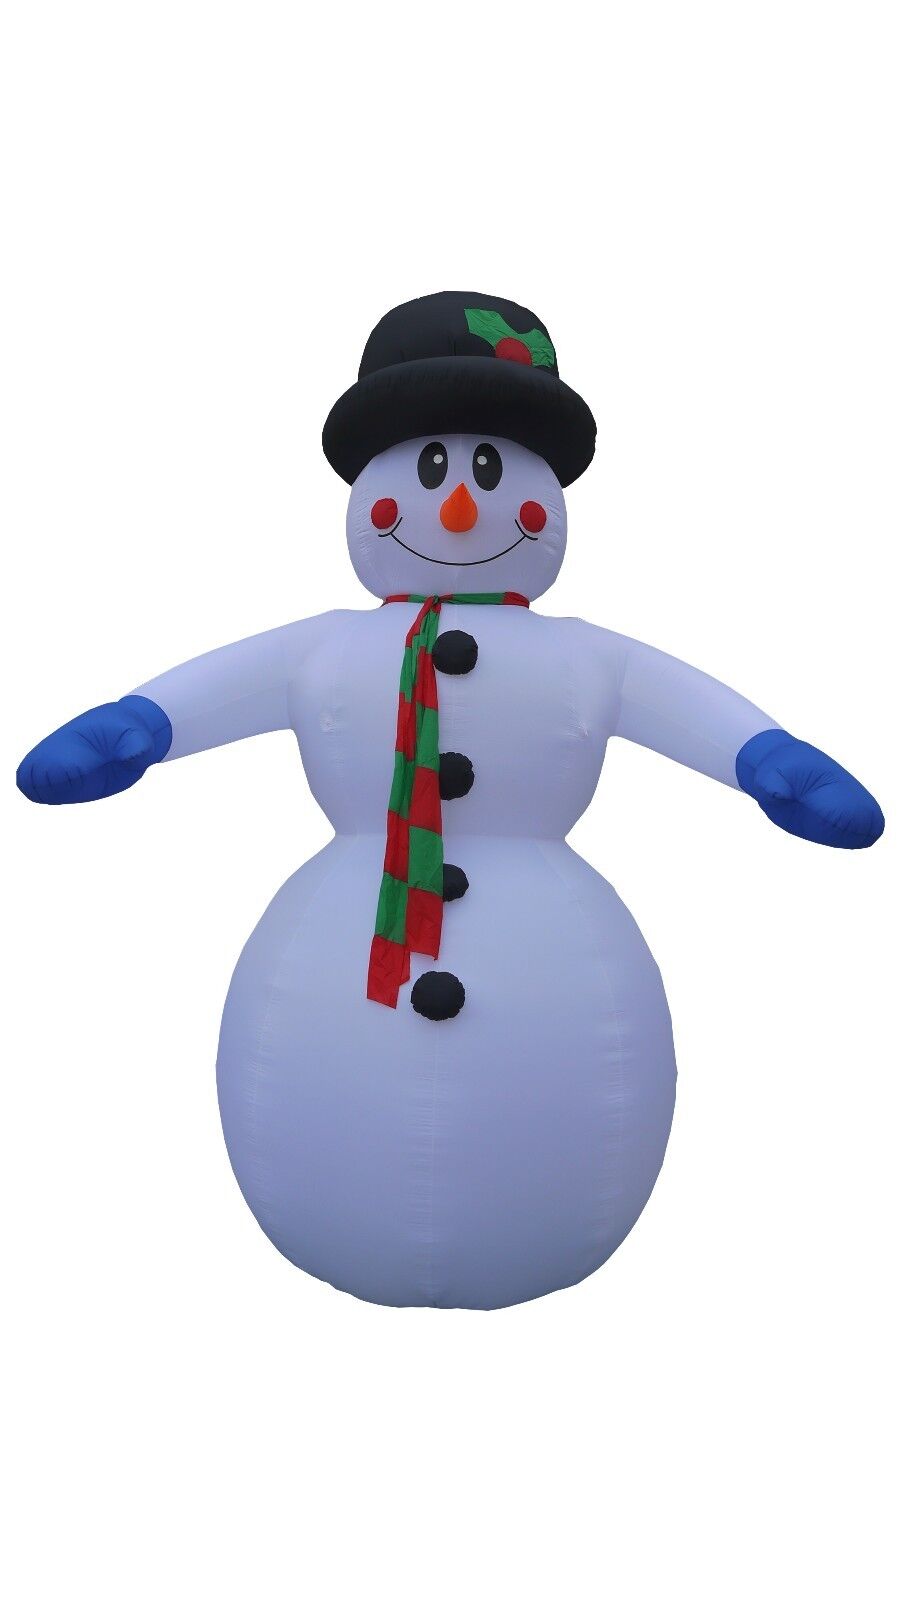 JUMBO 20 FOOT TALL Christmas Inflatable Snowman Blowup Yard Outdoor Decoration